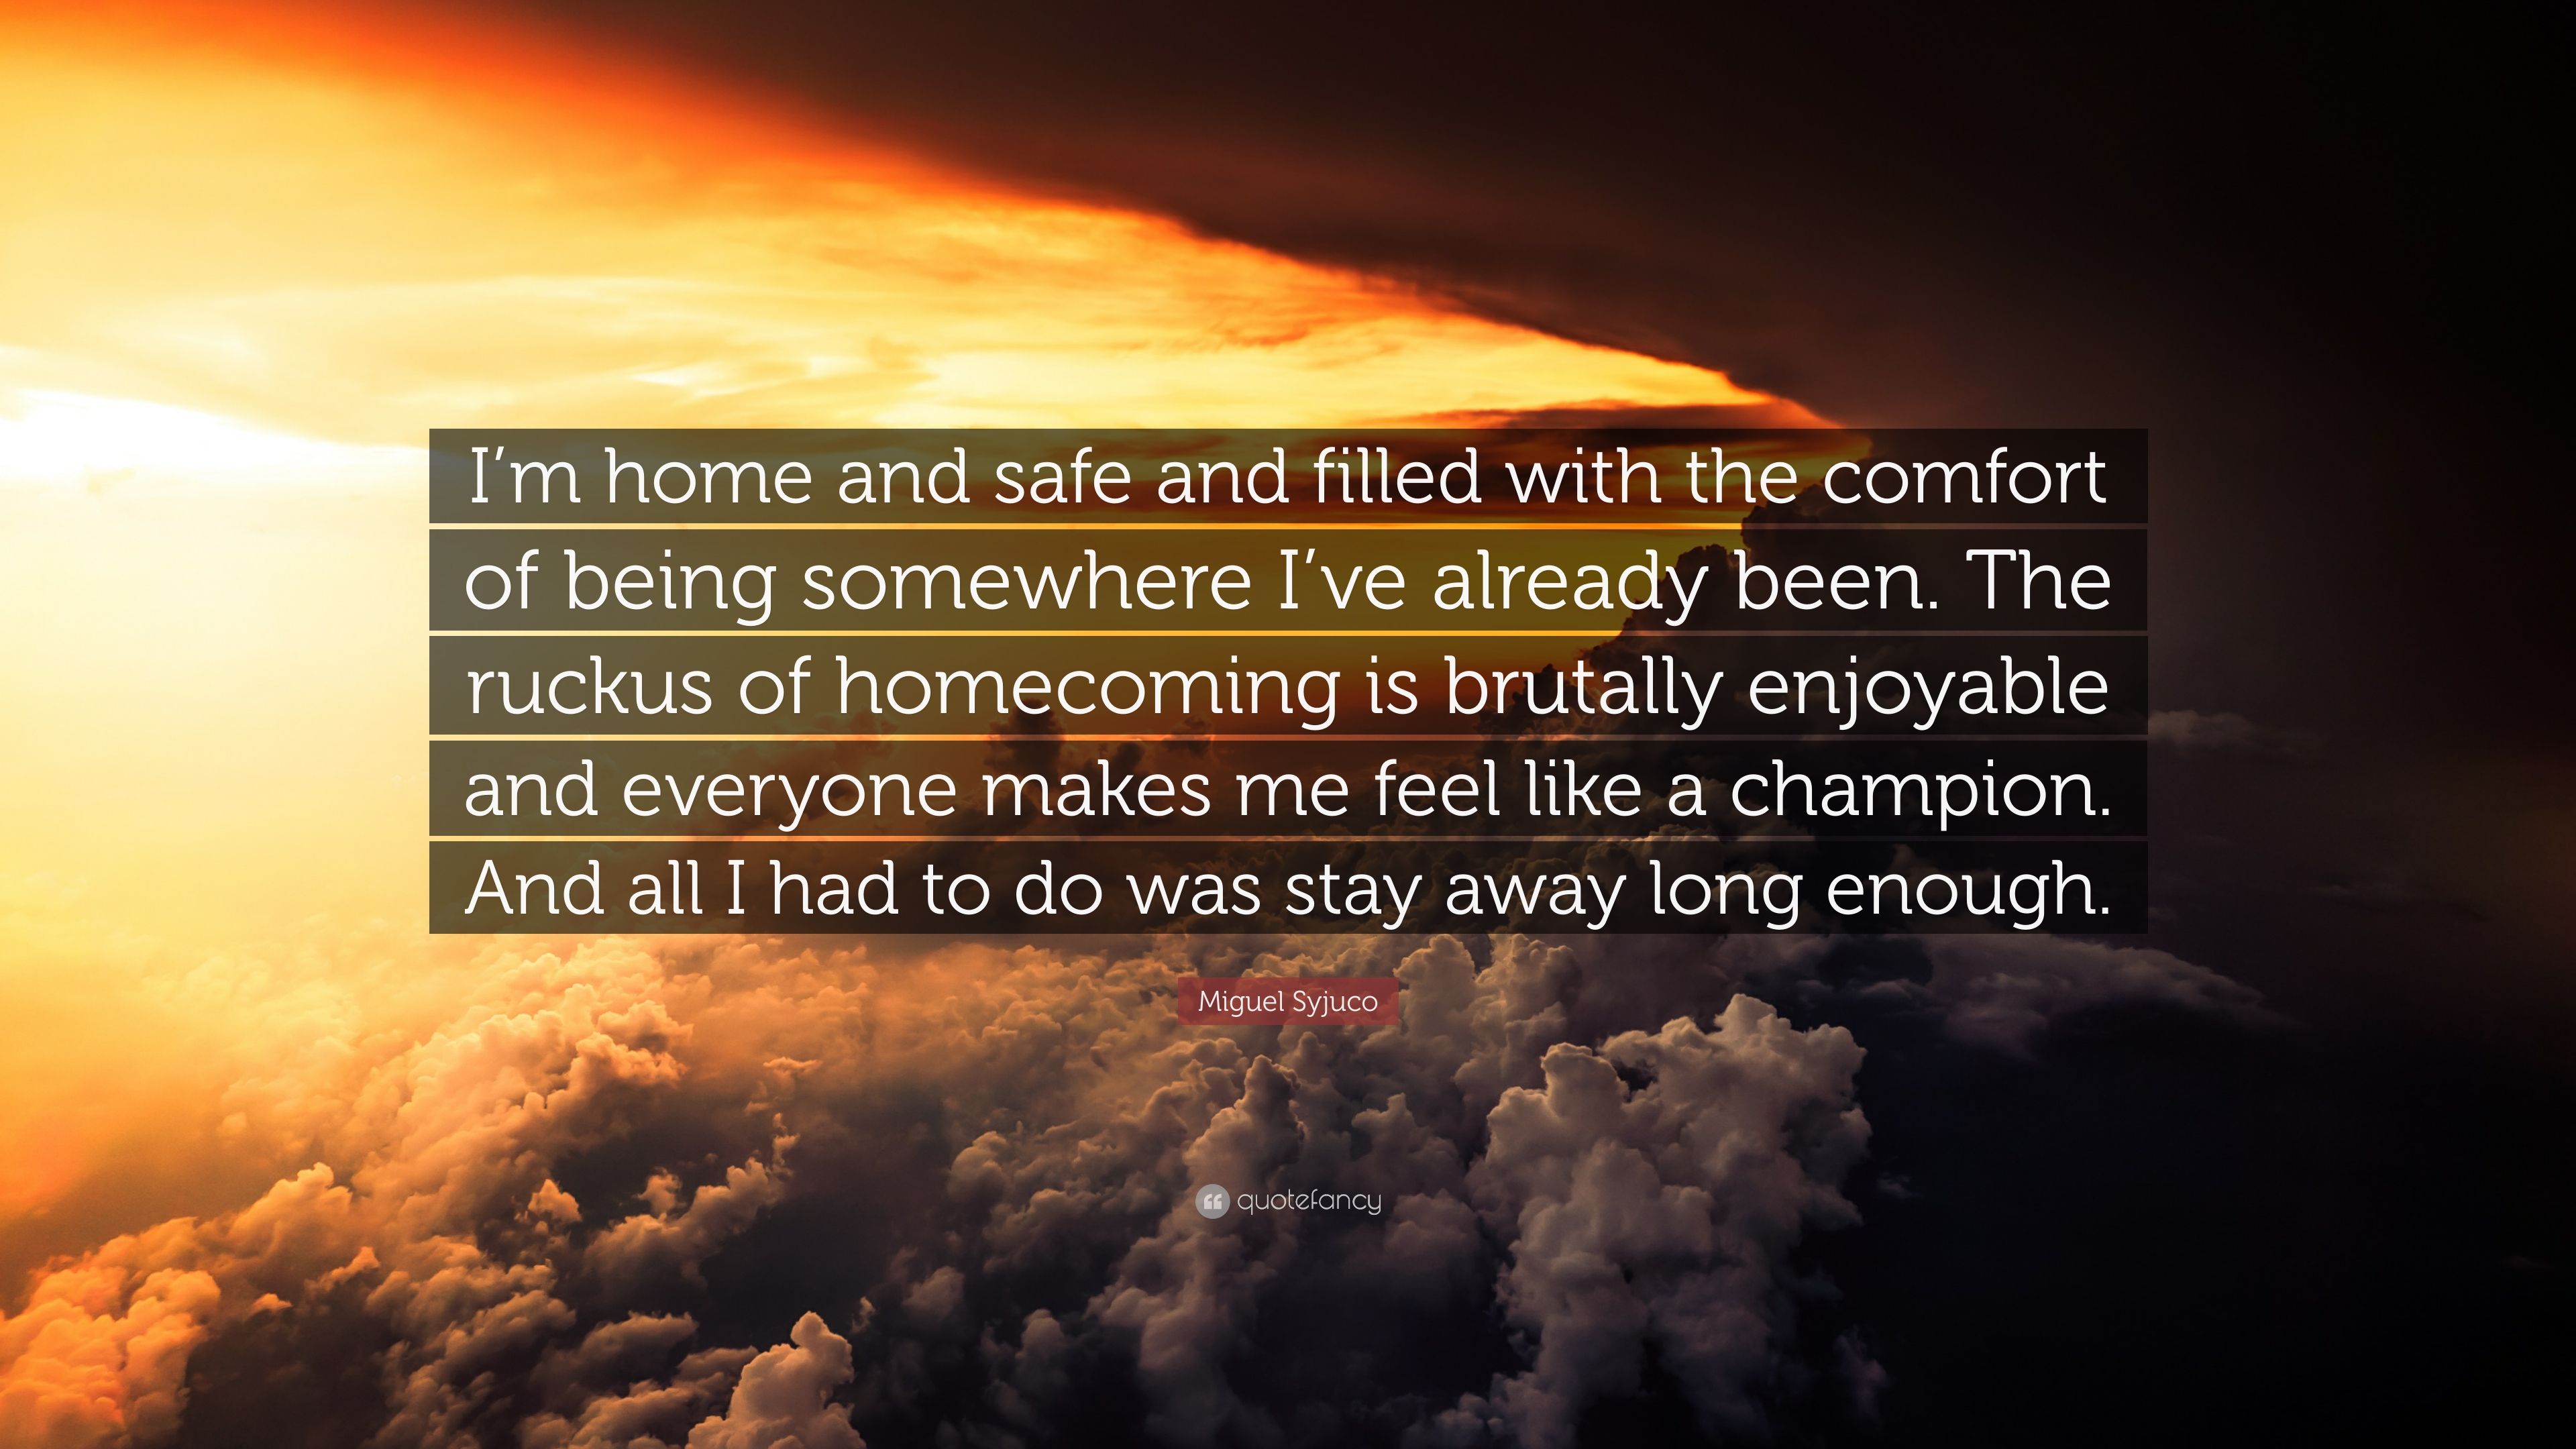 Miguel Syjuco Quote: “I'm home and safe and filled with